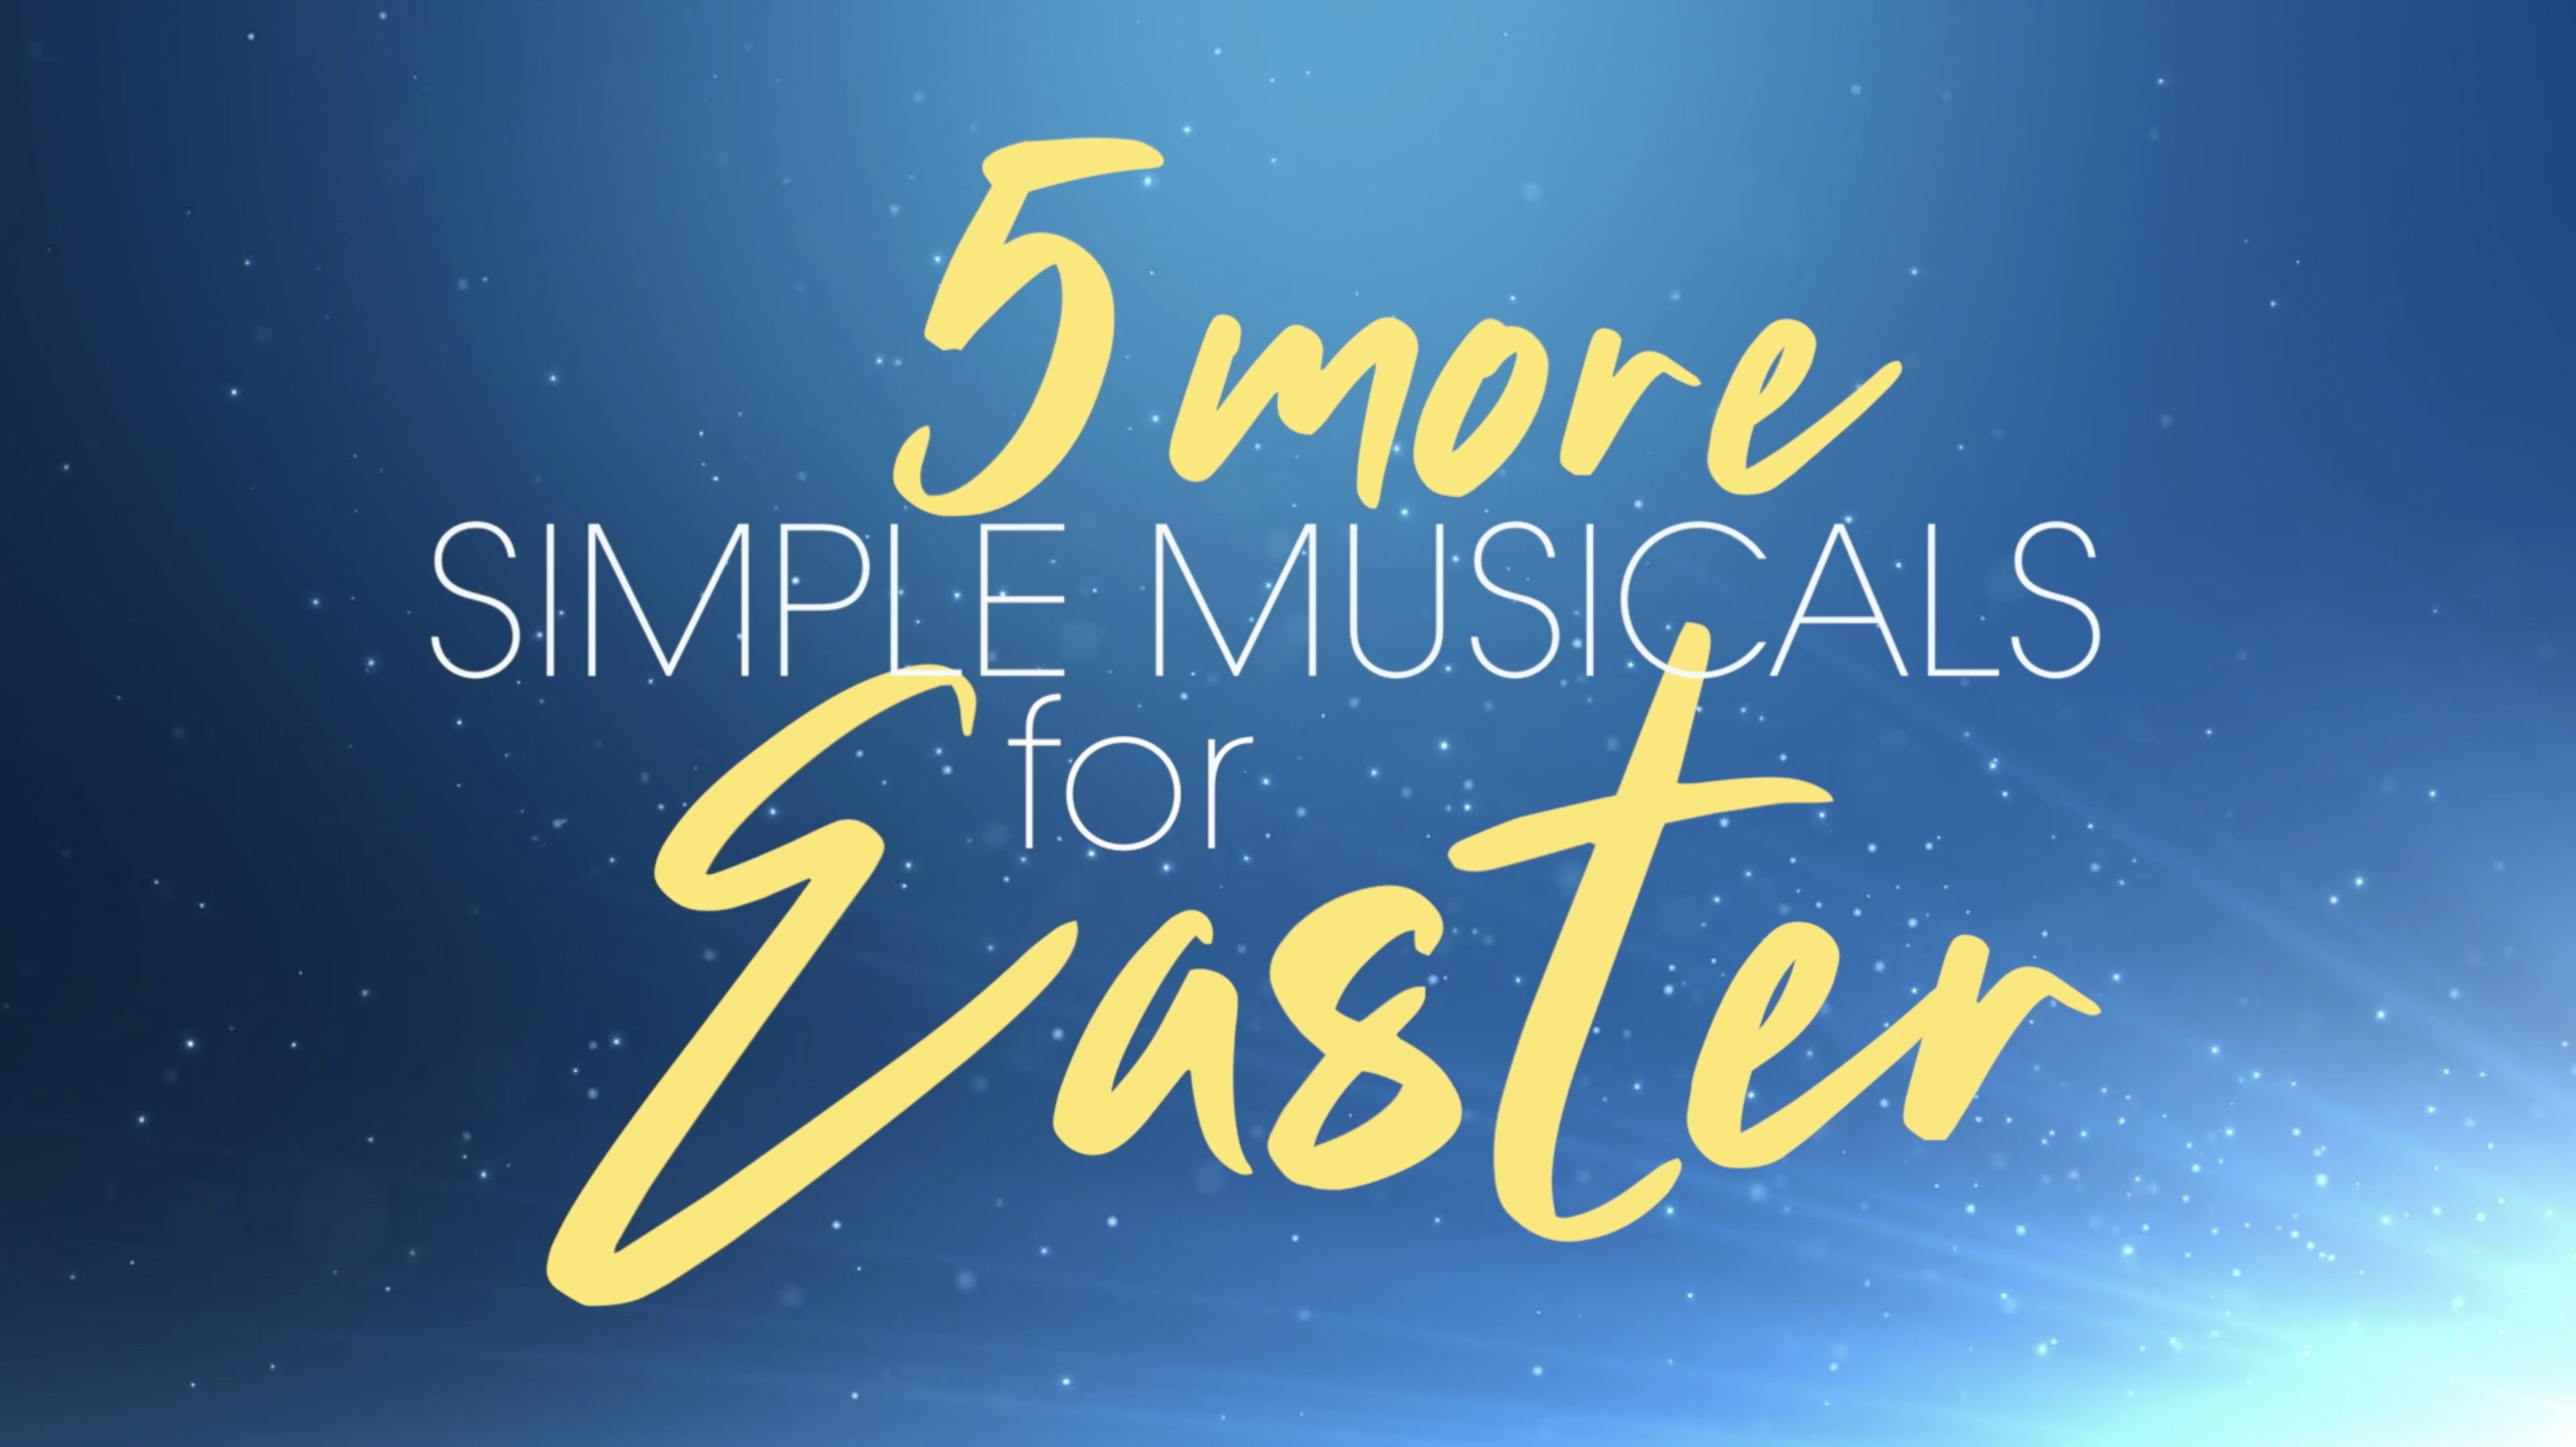 5 More Simple Musicals for Easter